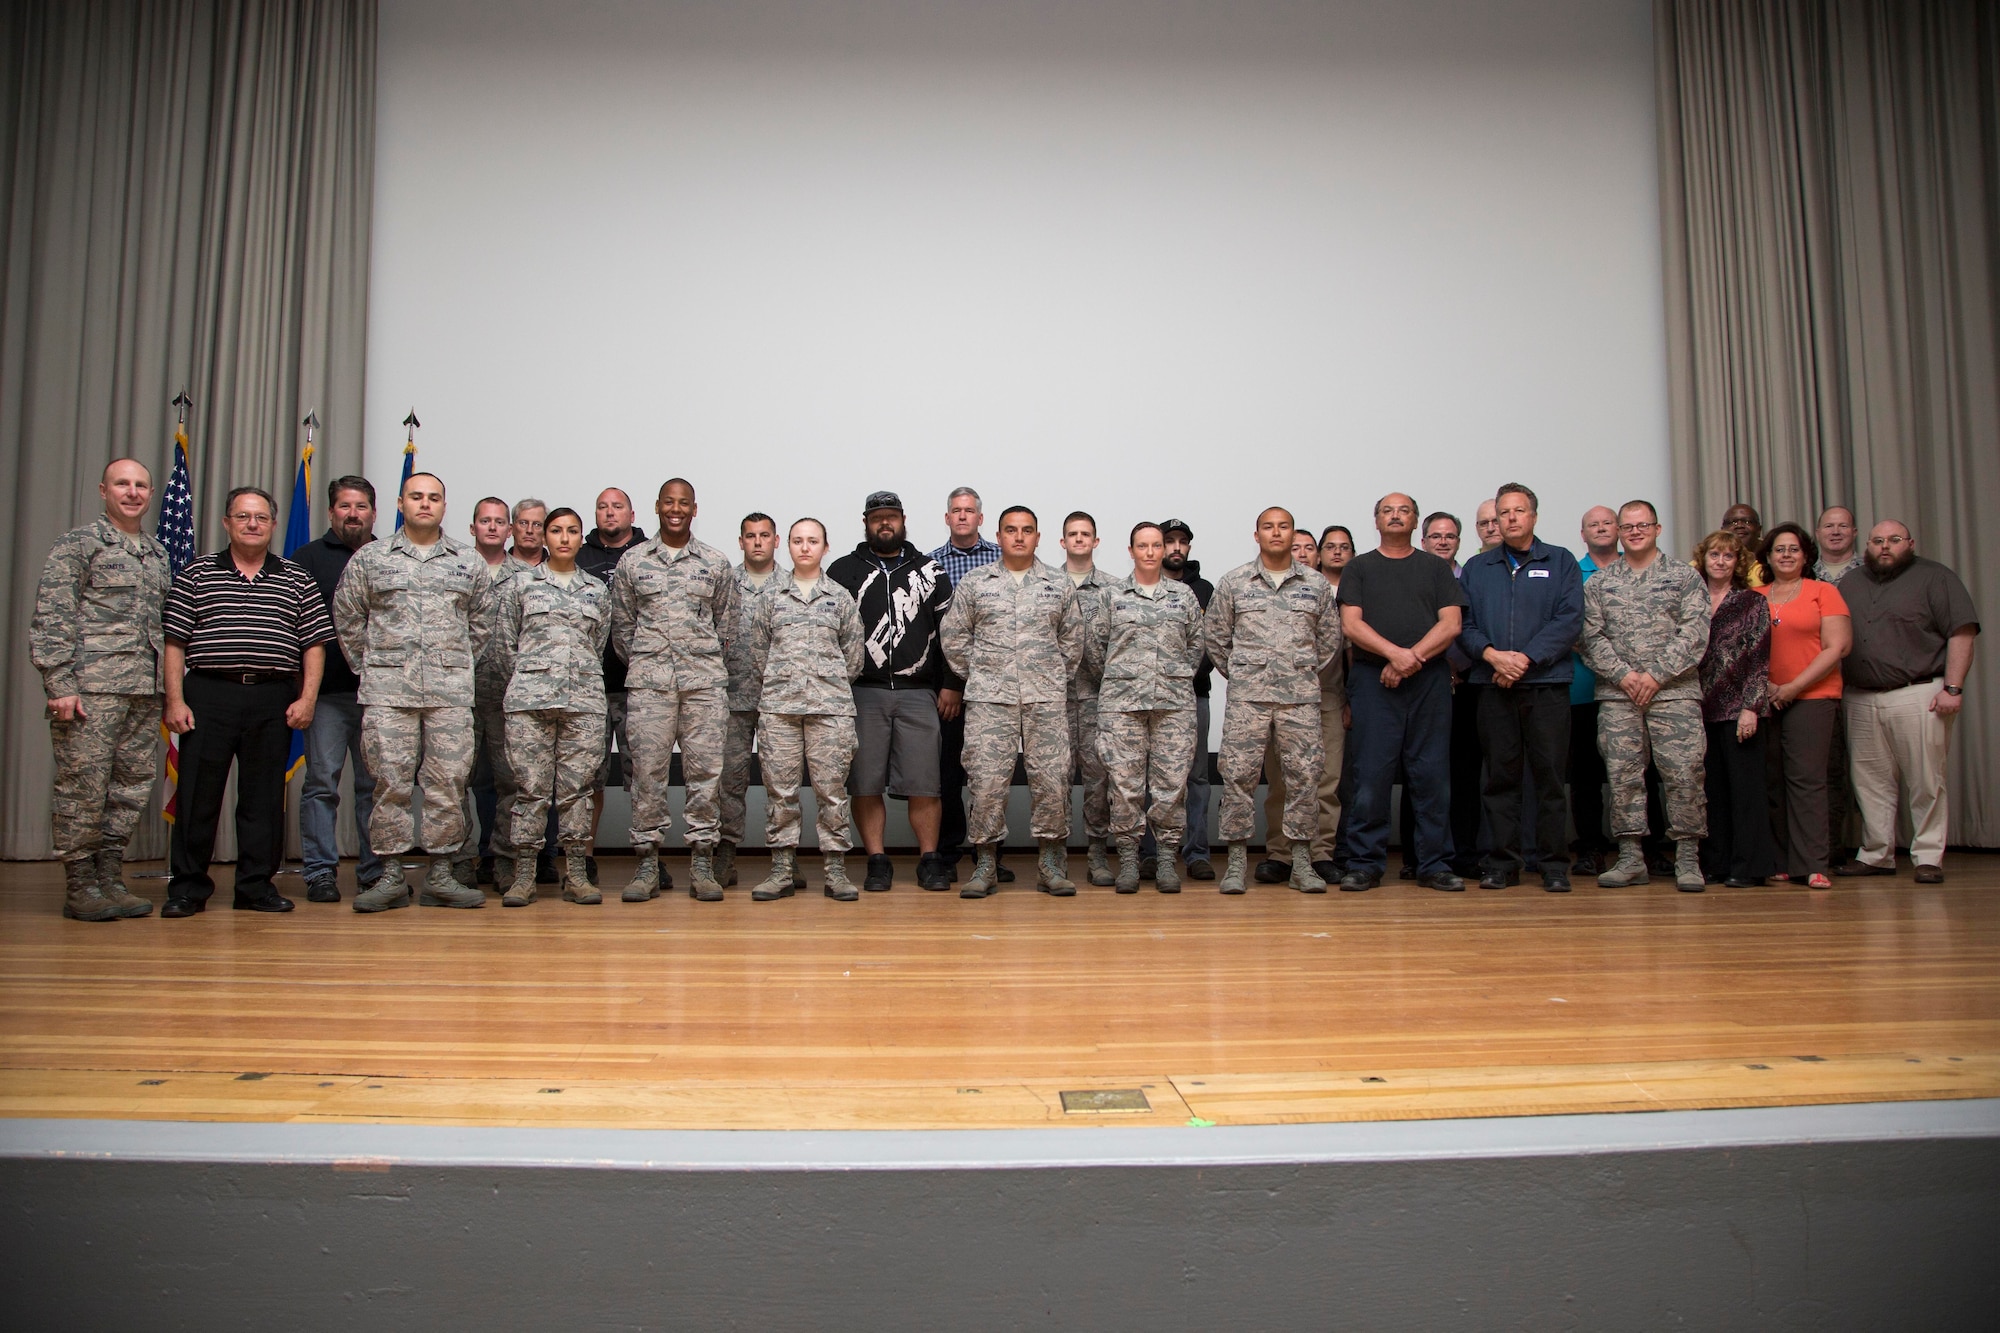 412th Maintenance Group members pose for a photo for their role in the recent Unit Effectiveness Inspection. (U.S. Air Force photo by Christian Turner)